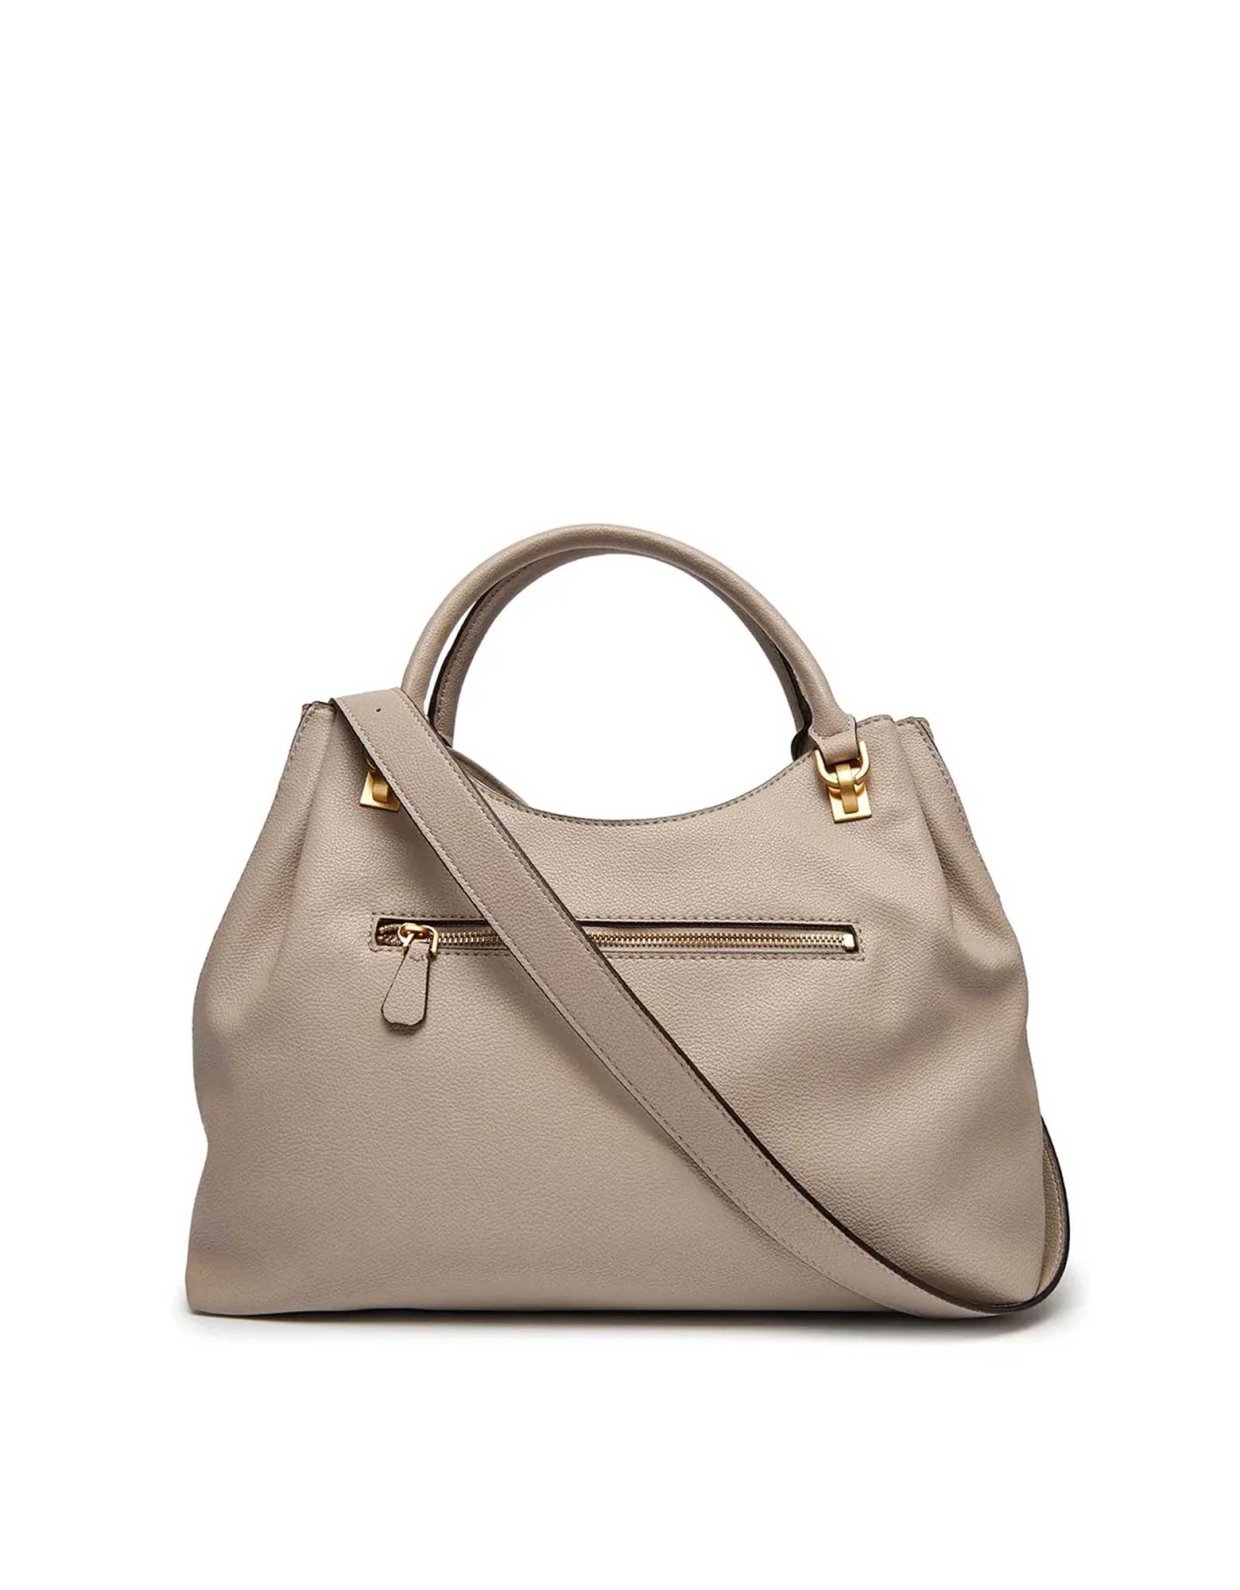 Guess Cosette carryall tote bag taupe